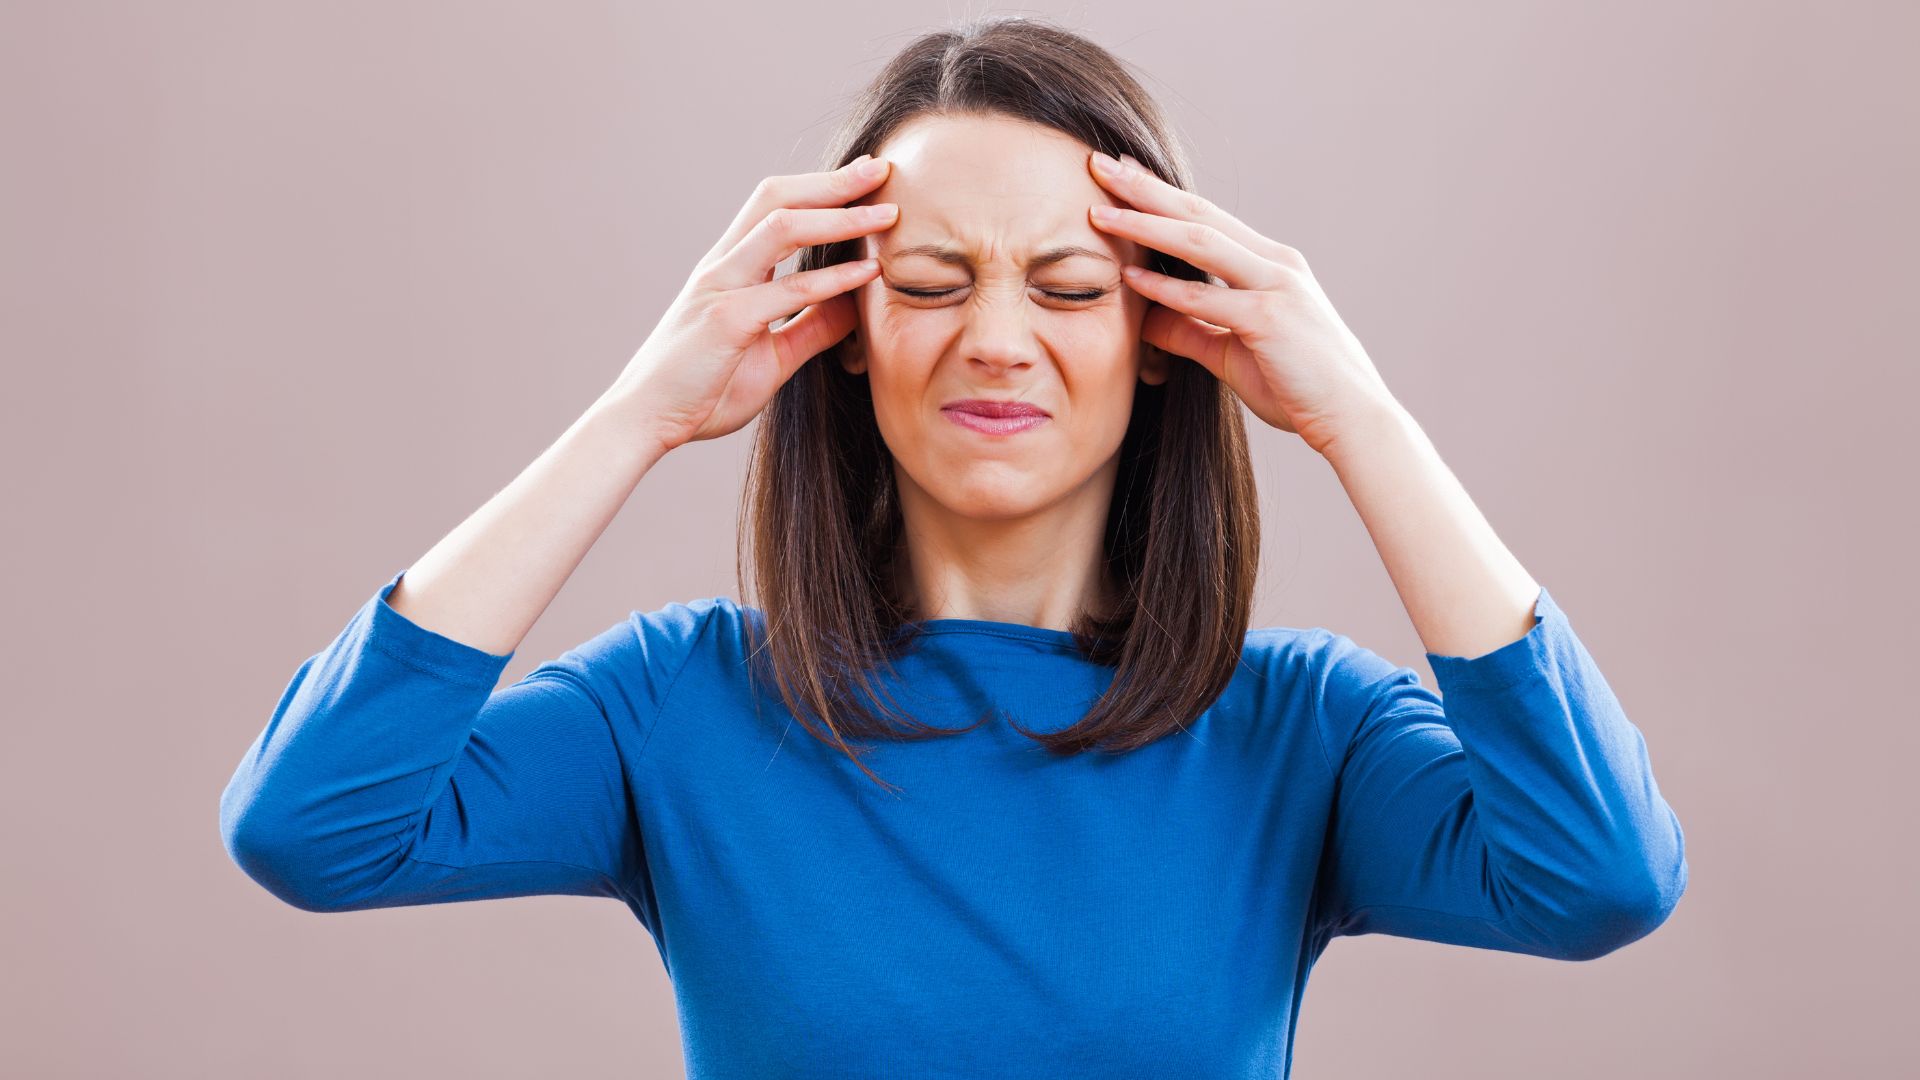 When to Know It’s Time to See a Doctor for a Headache